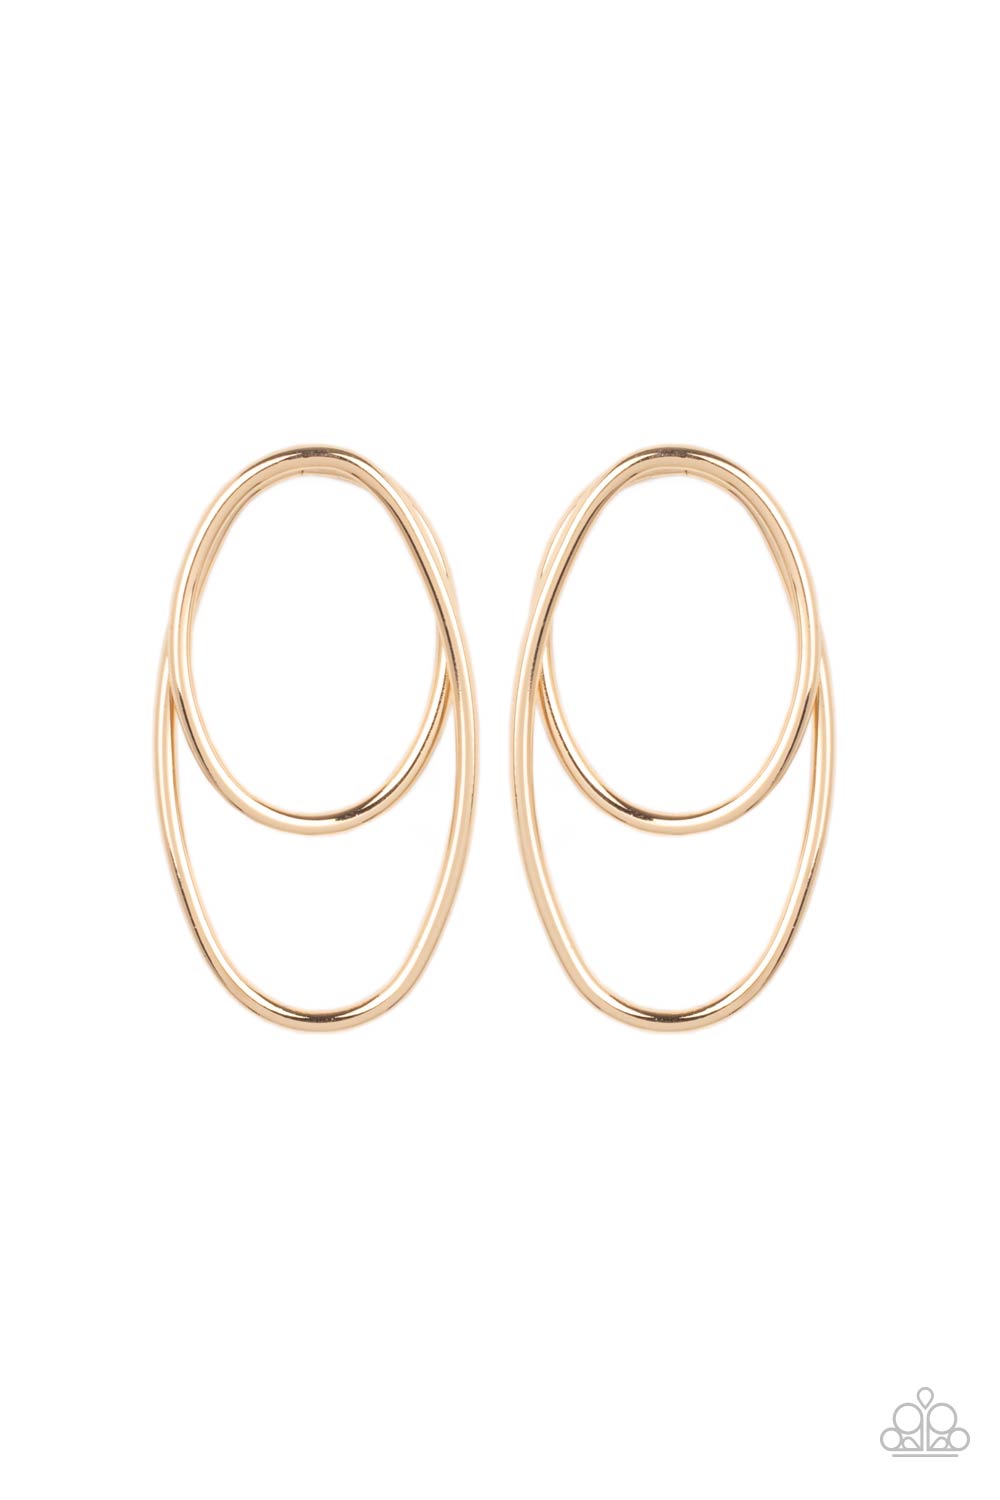 So OVAL-Dramatic - Gold Earrings - Paparazzi Accessories